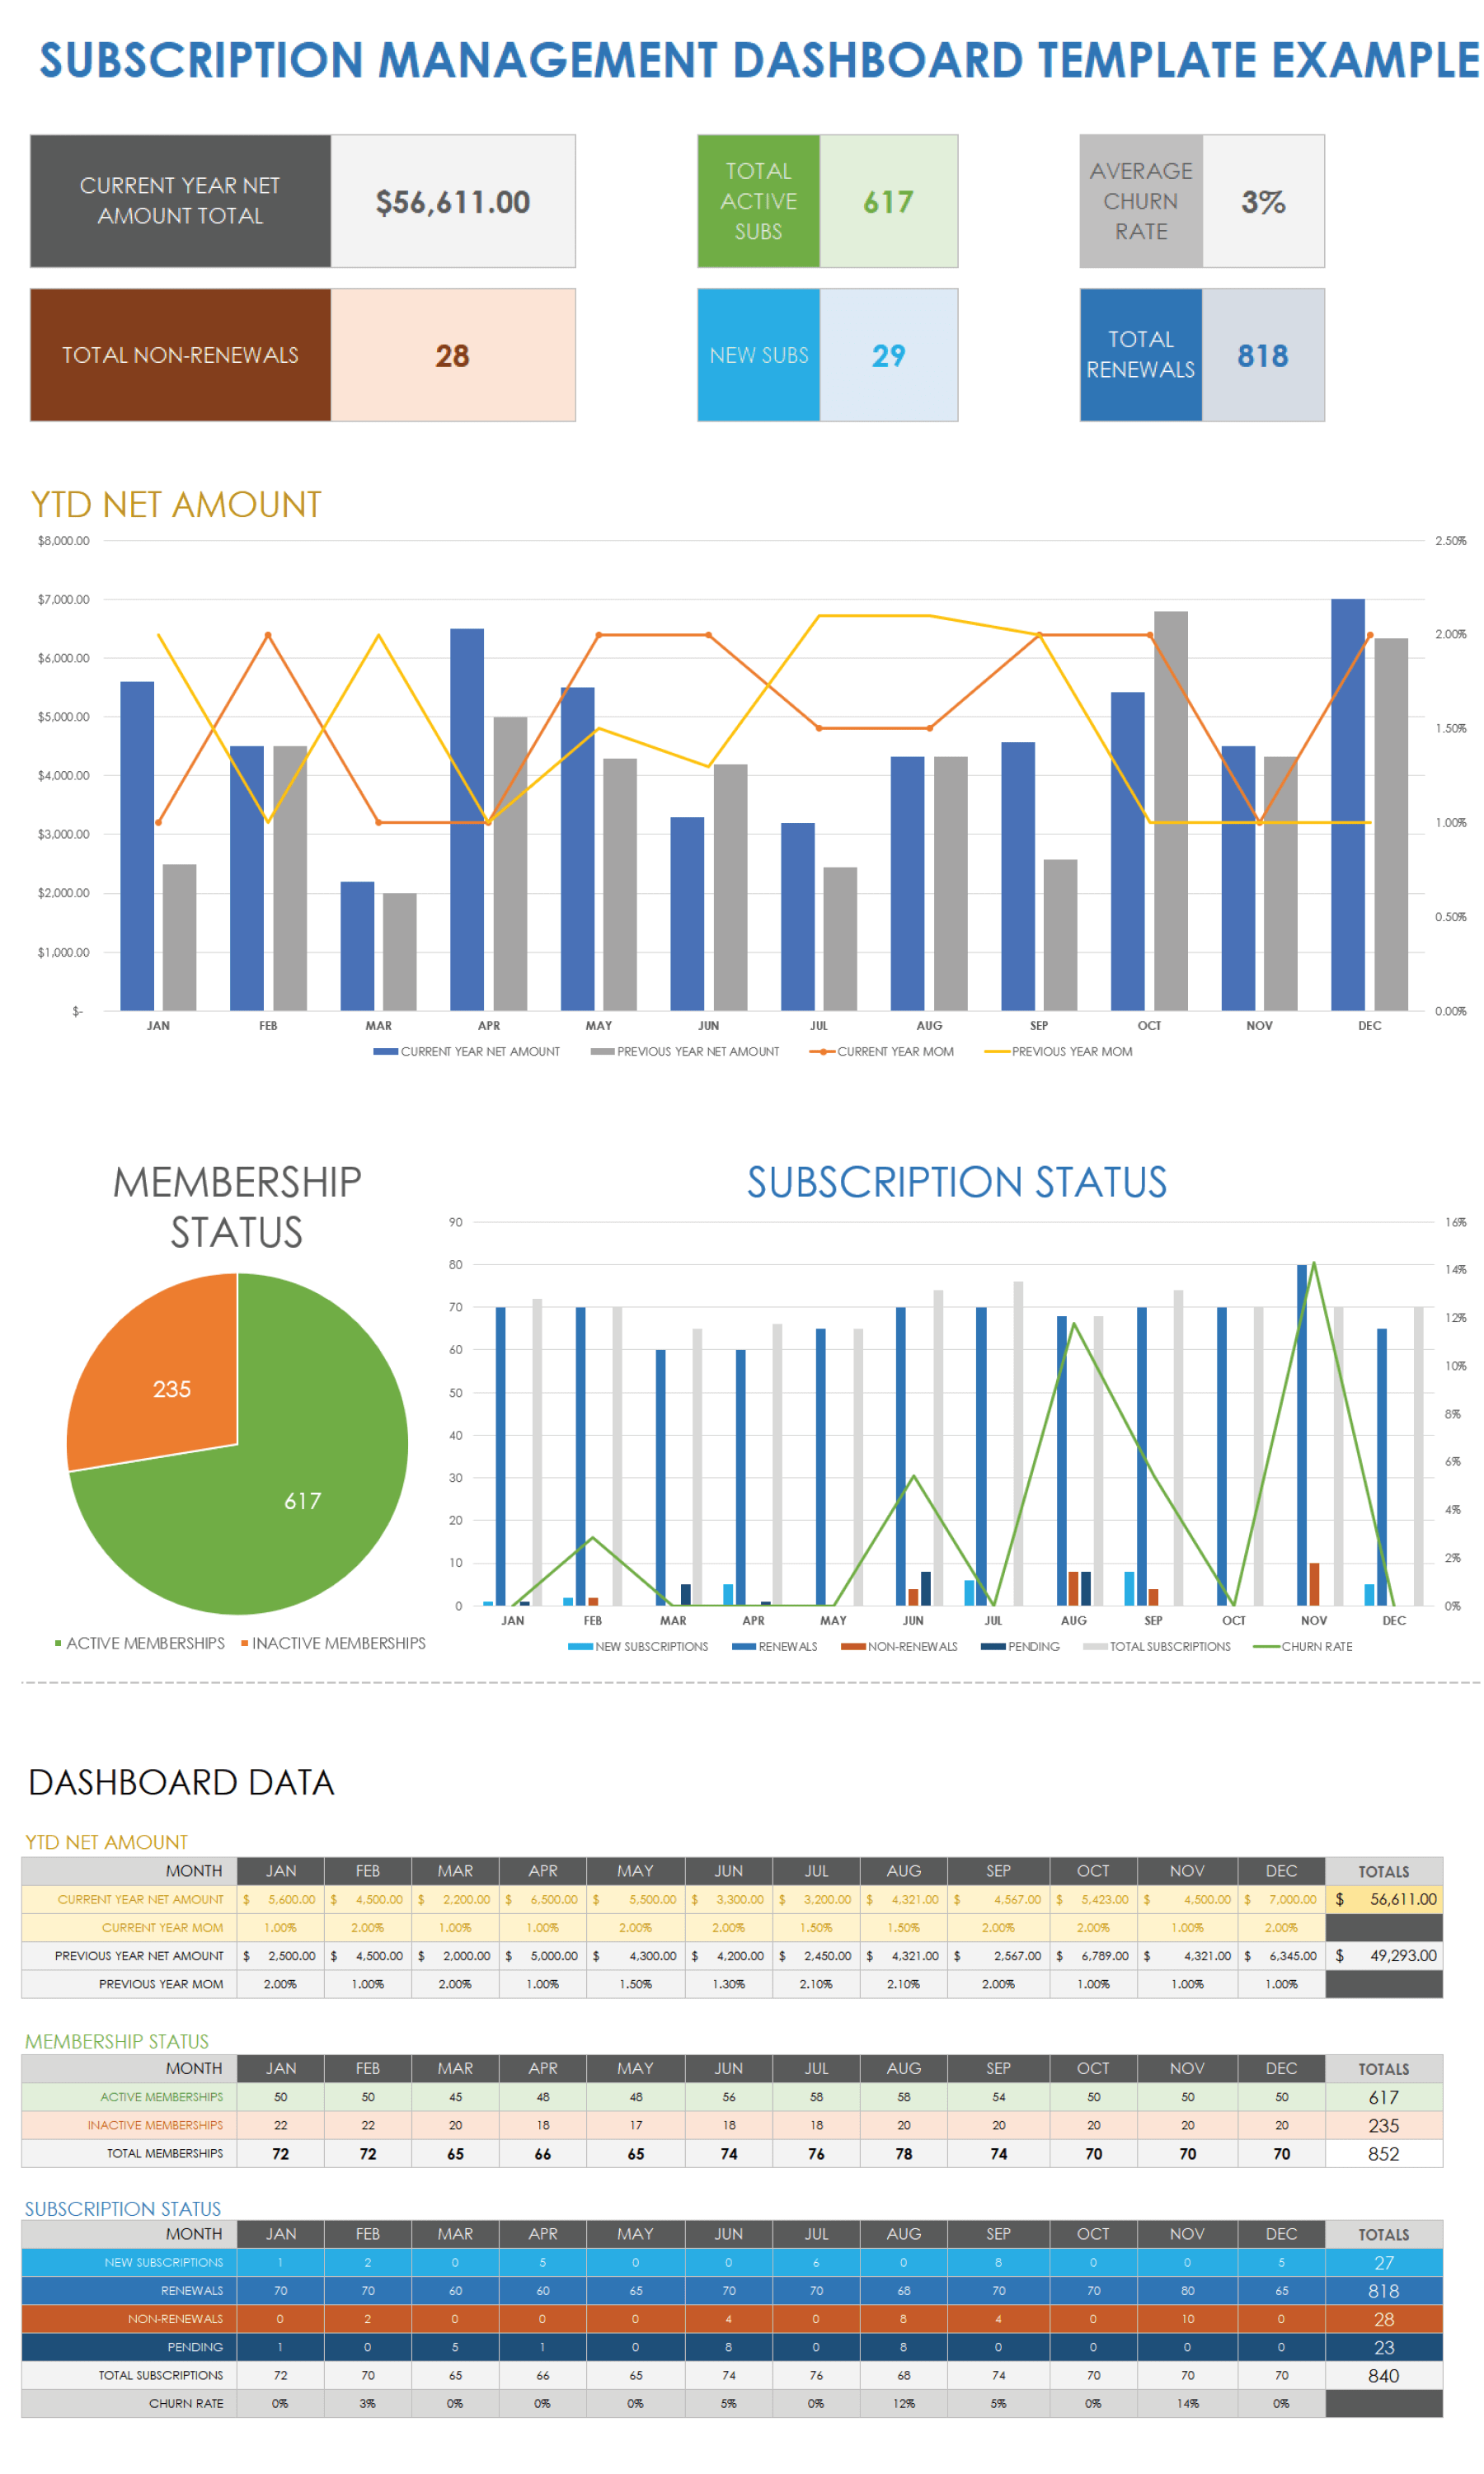 Example Subscription Management Dashboard Template